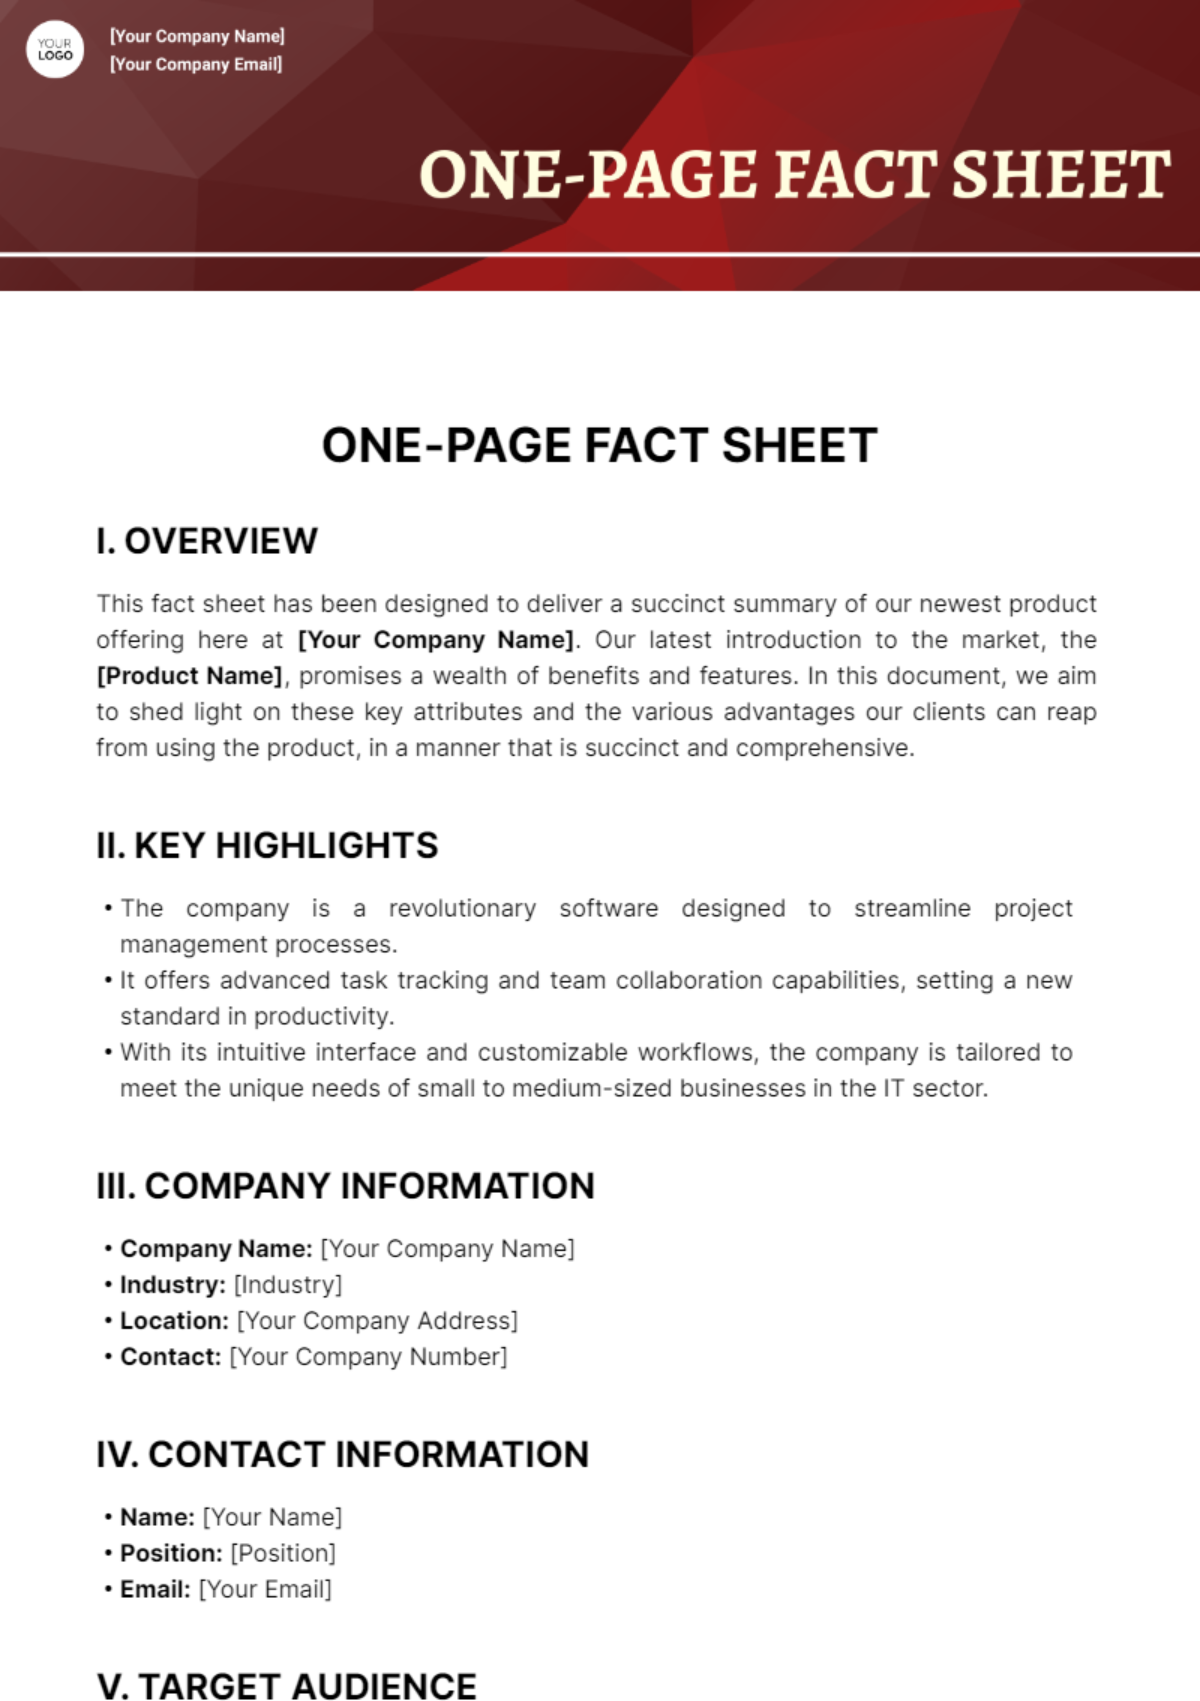 One Page Fact Sheet Template